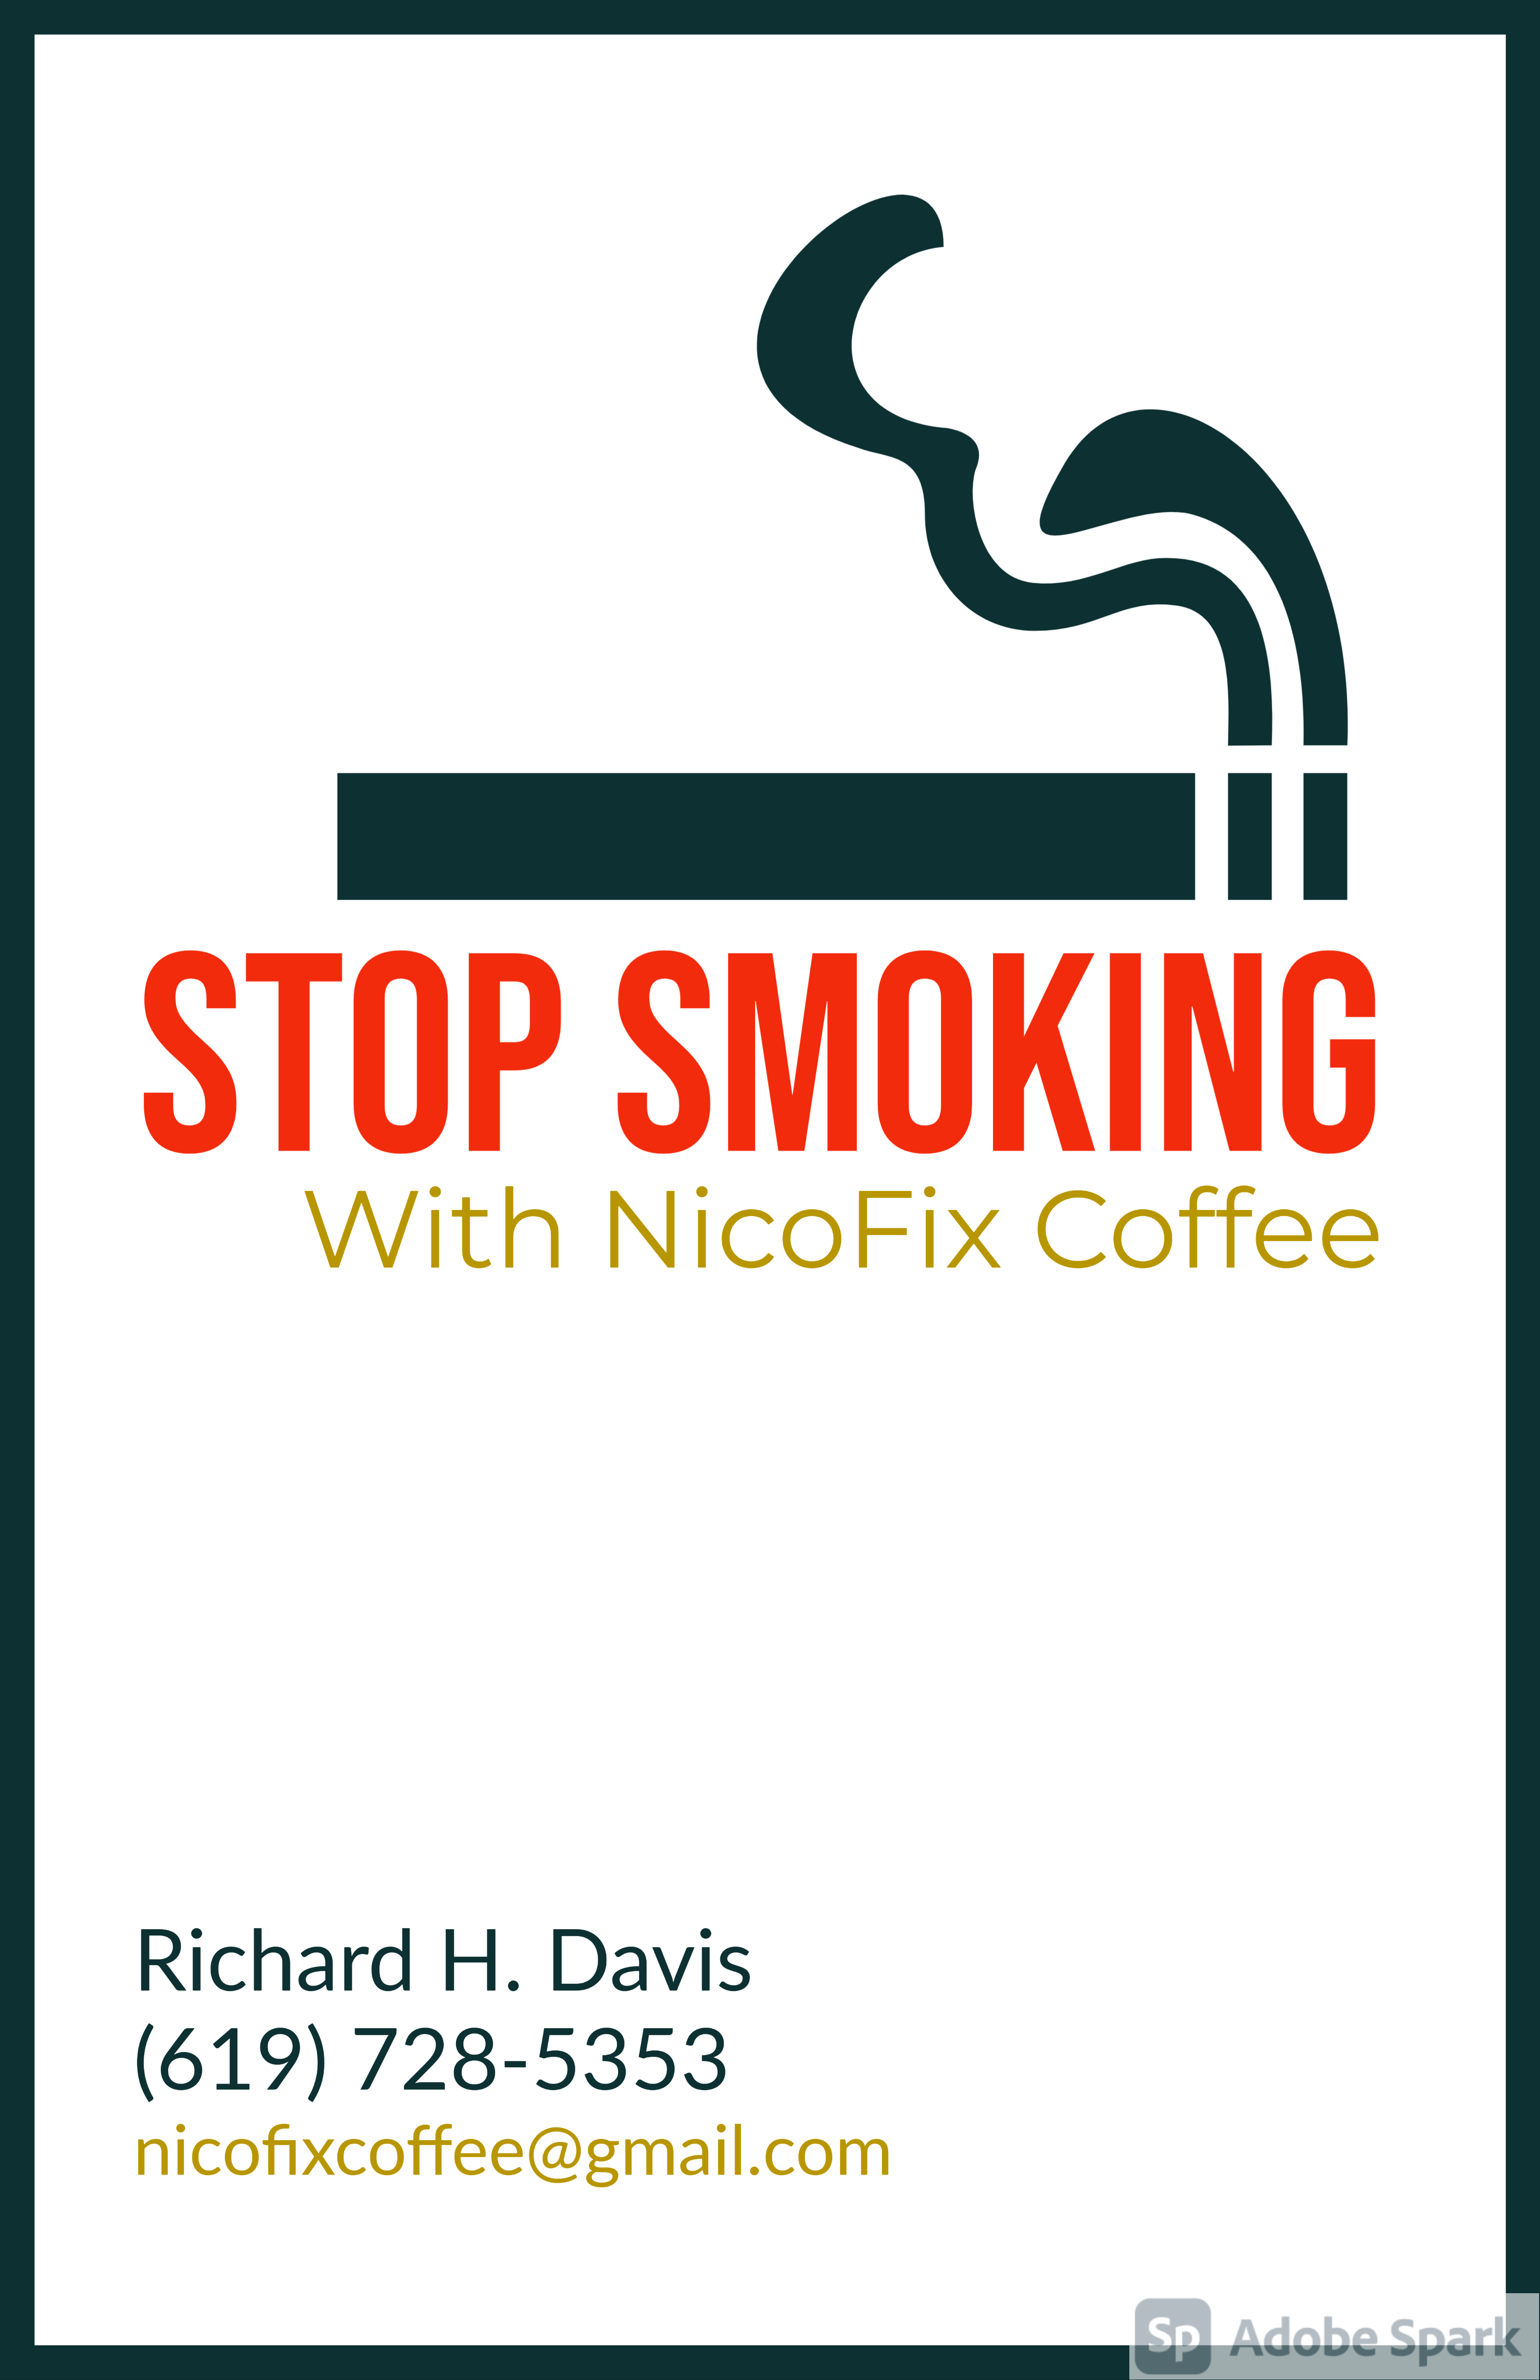 Nautilus Launches Nicotine Coffee: "NicoFix" - A New Brew Designed to Help Coffee Drinkers Stop Smoking 